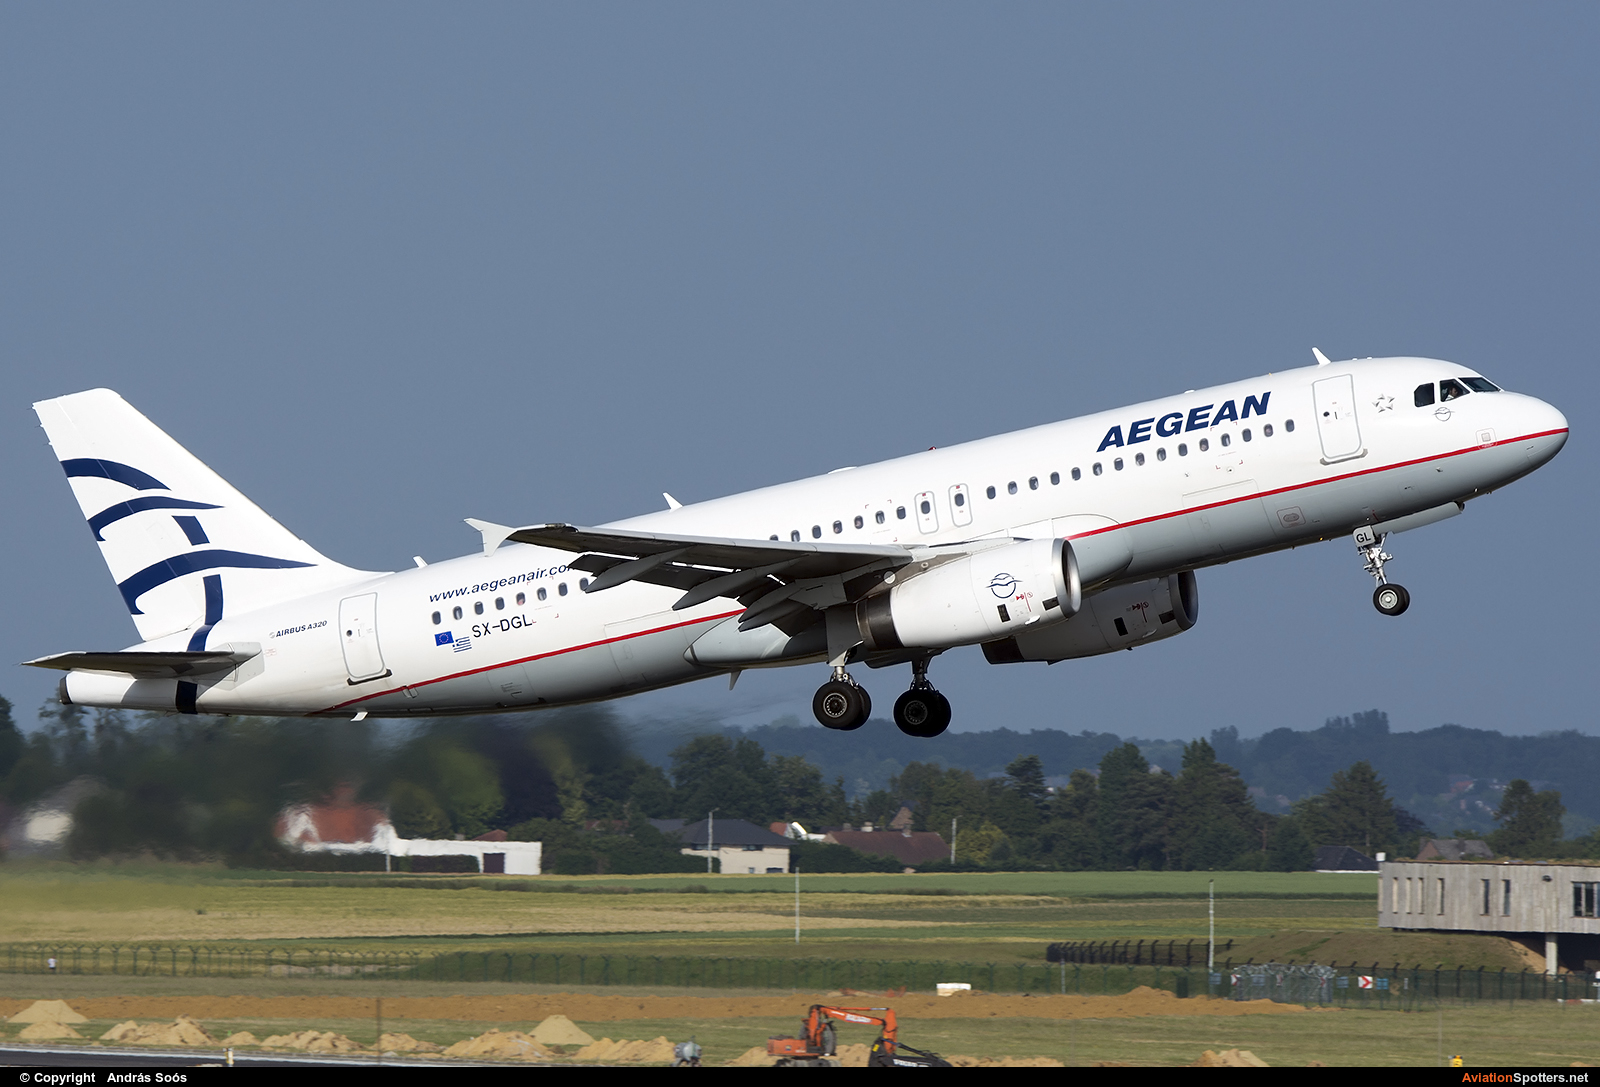 Aegean Airlines  -  A320-232  (SX-DGL) By András Soós (sas1965)